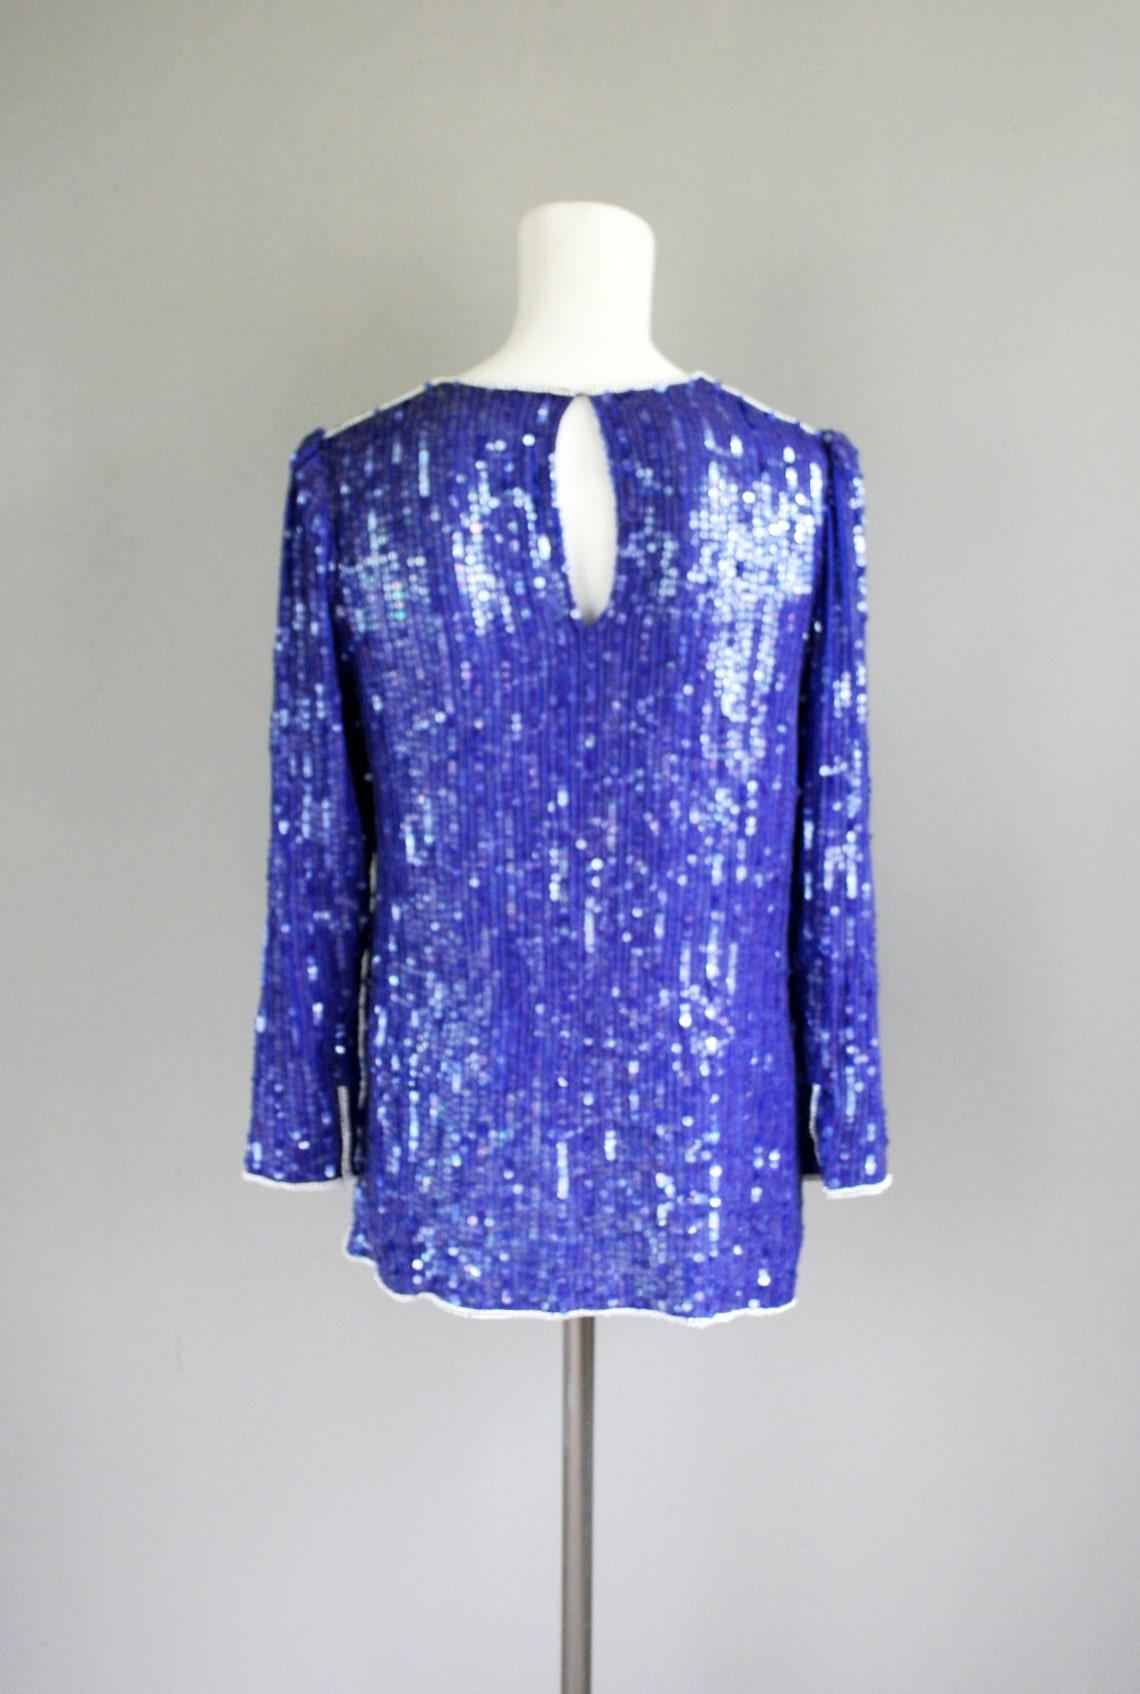 1980s Royal Blue Sequined Top by Judith Ann Creations - Etsy